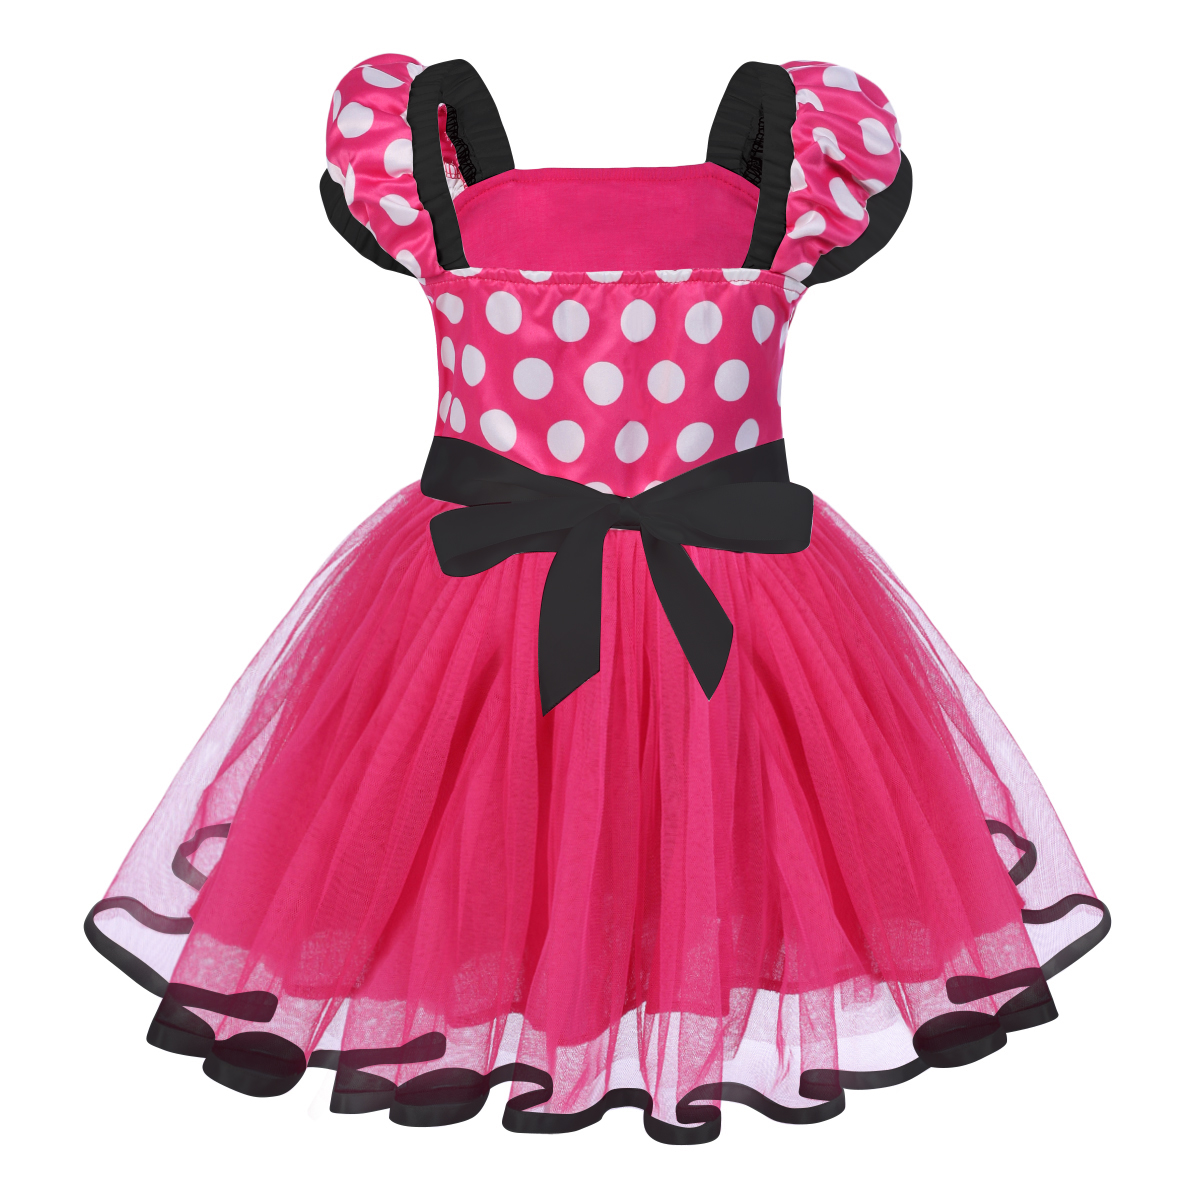 IBTOM CASTLE Toddler Girls Polka Dots Princess Party Cosplay Pageant Fancy Dress up Birthday Tutu Dress + Ears Headband Outfit Set 18-24 Months Hot Pink + Black - image 4 of 6